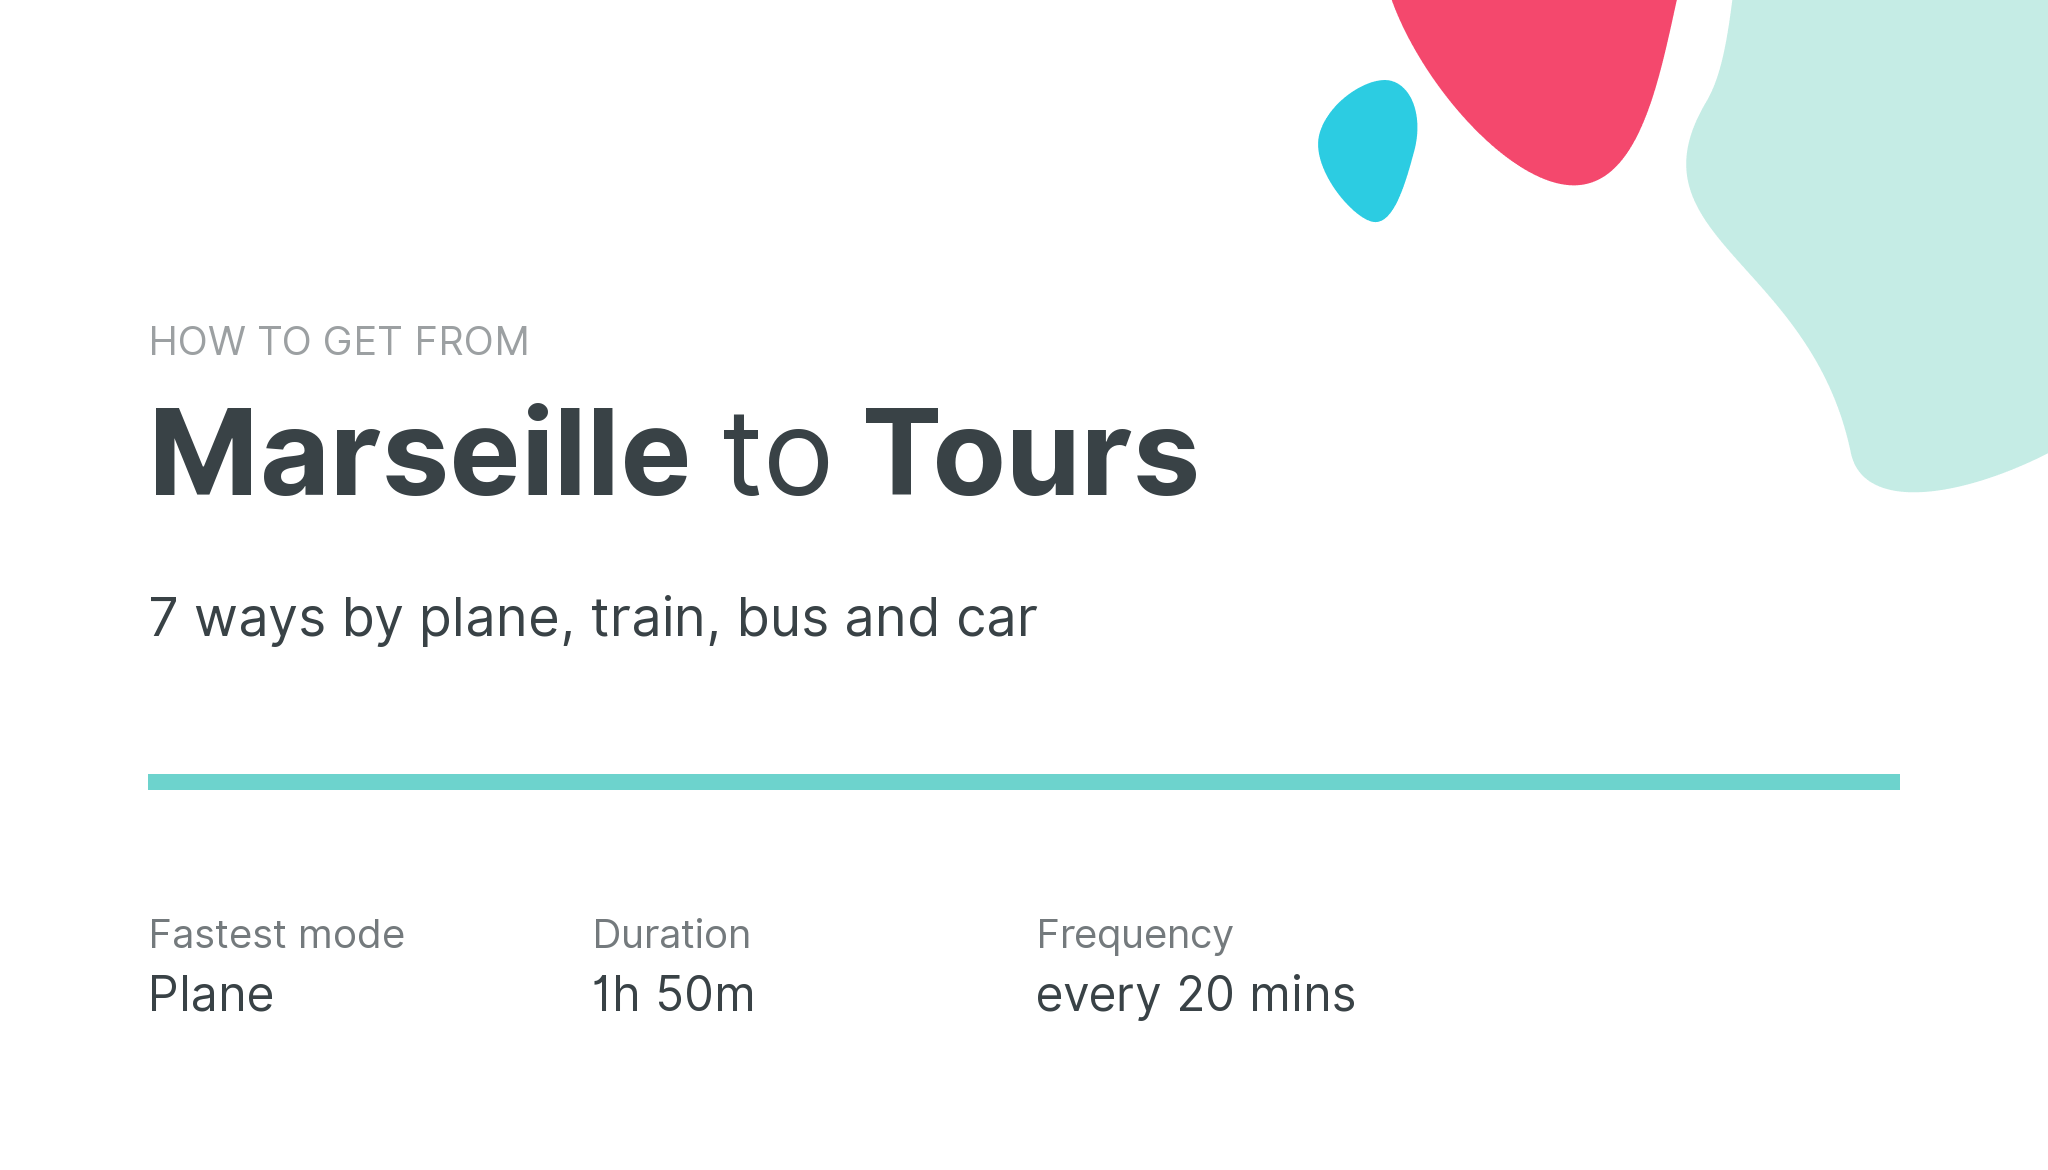 How do I get from Marseille to Tours